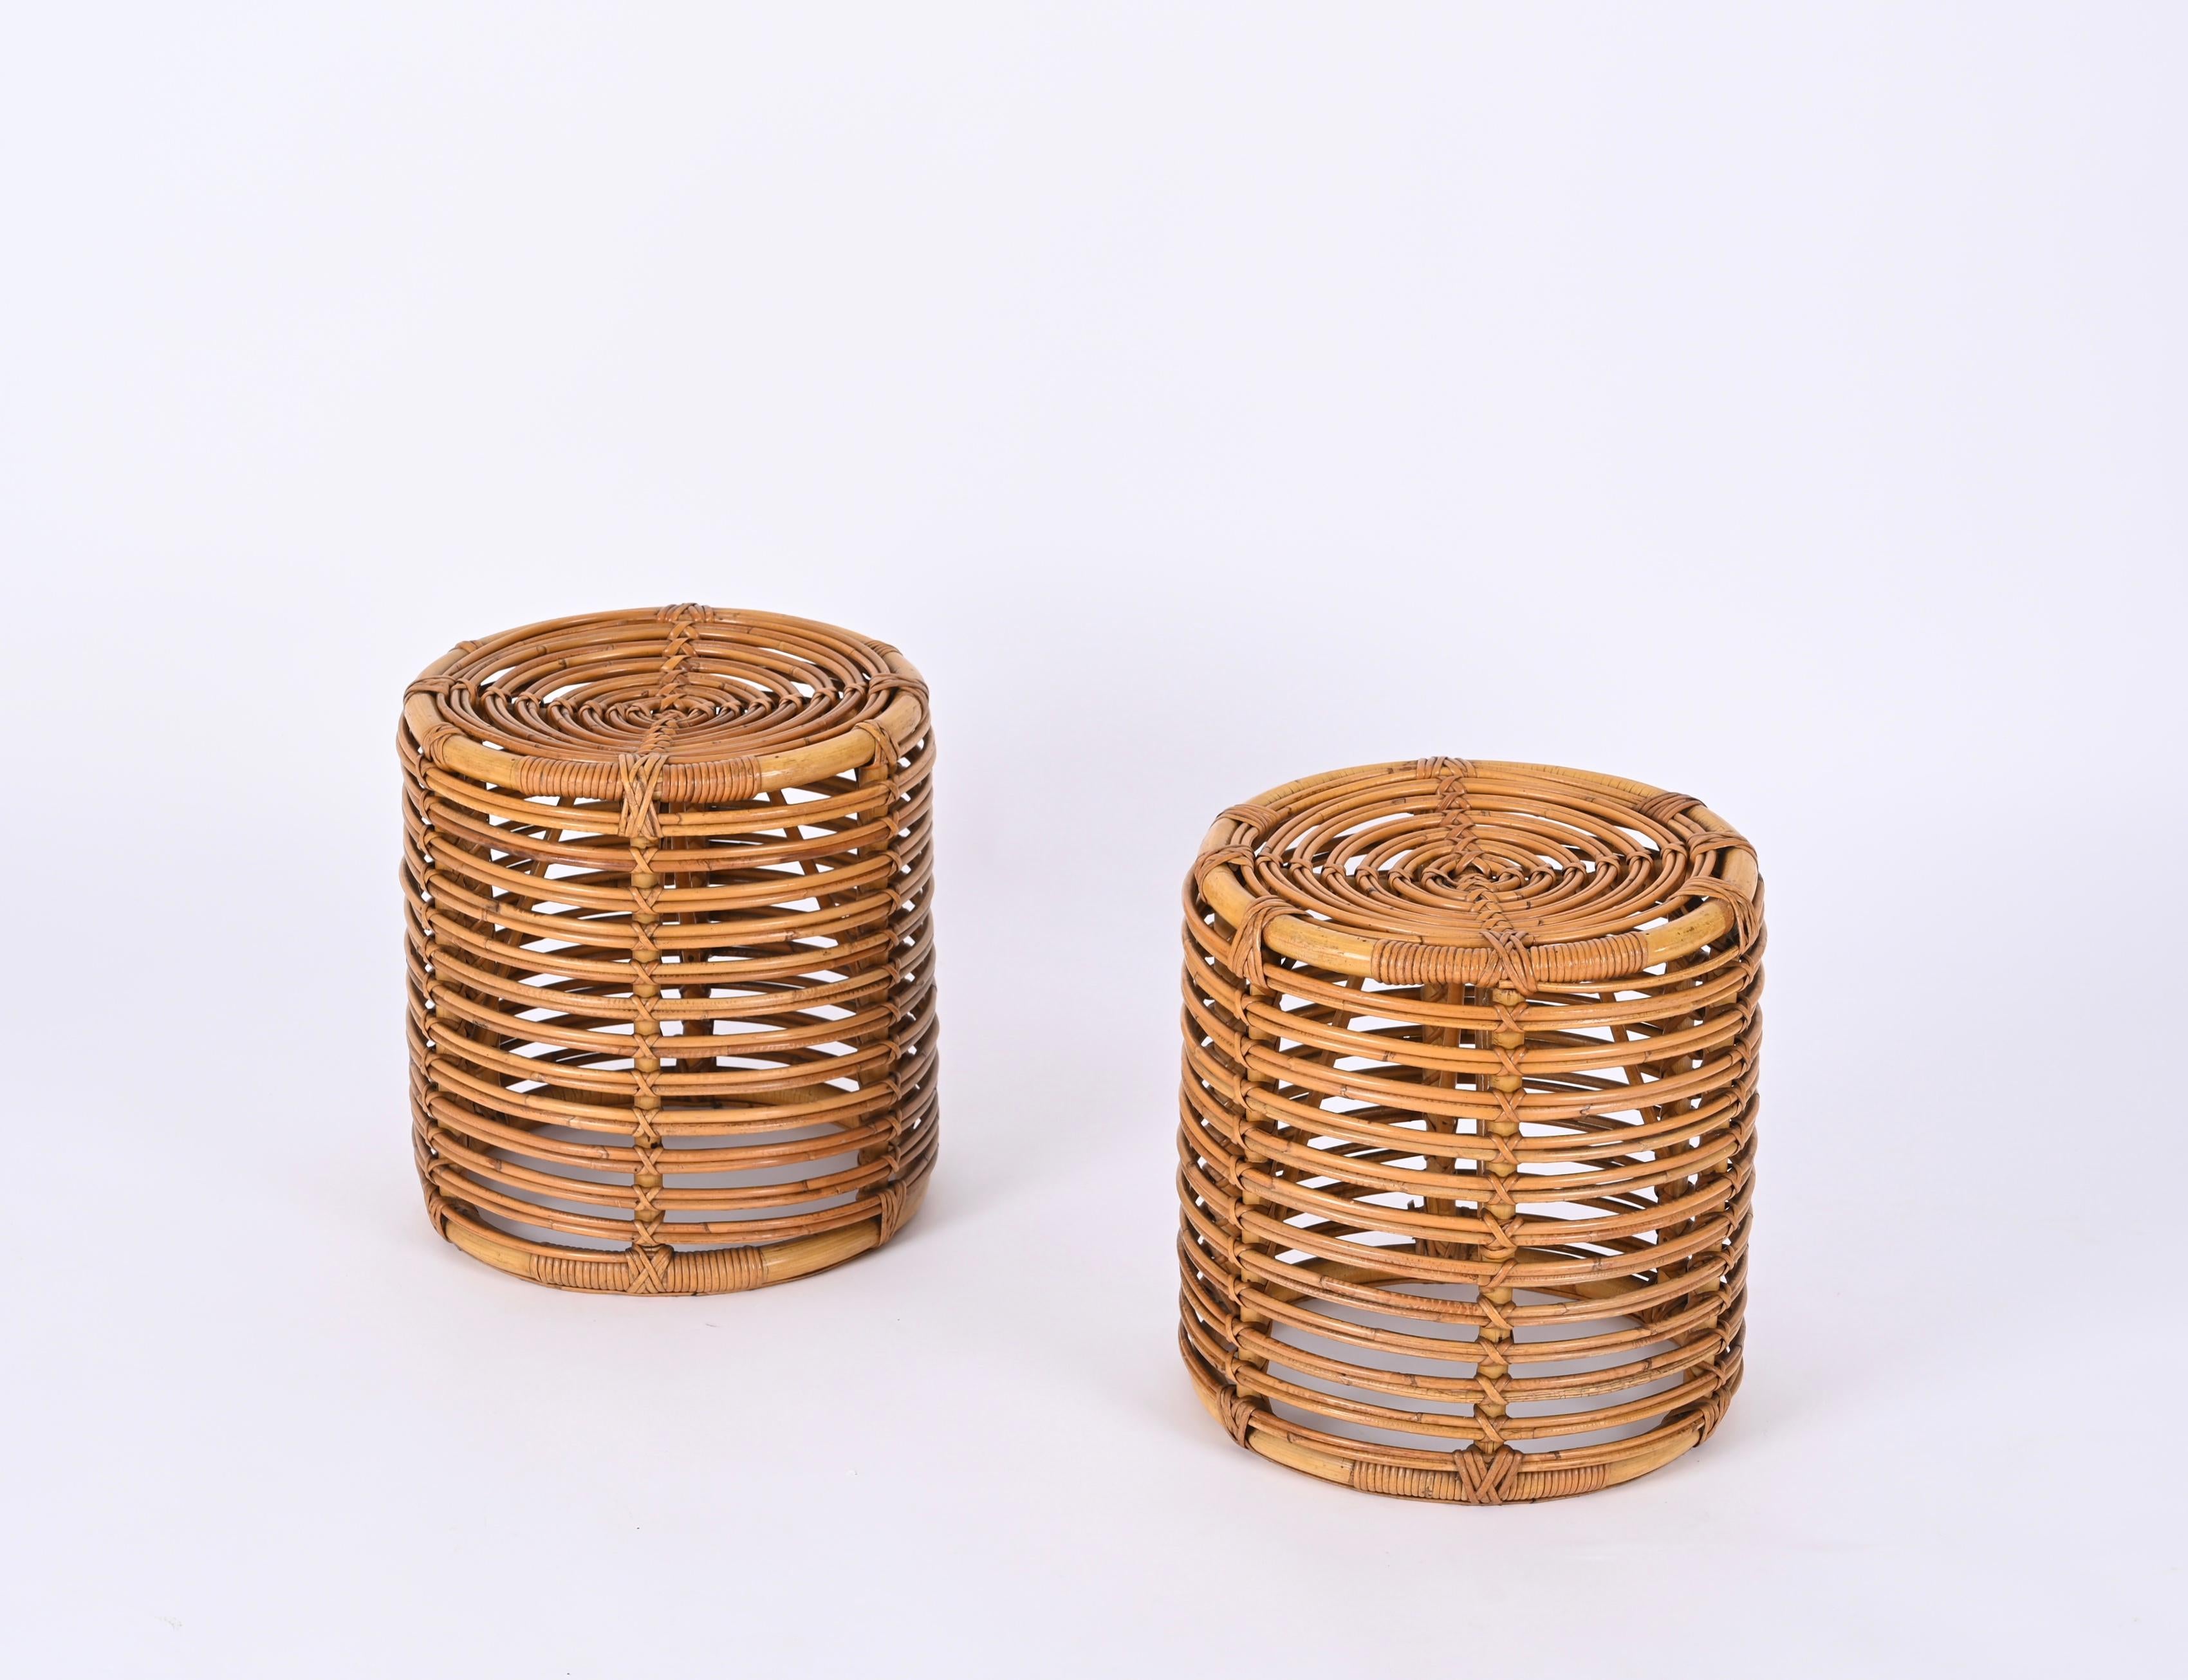 Beautiful pair of Tito Agnoli stools in rattan and bamboo. This fantastic and rare set was made in Italy during the 1960s.

The craftsmanship of these stools is exceptional and the curved bamboo structure allows each to be light and solid at the